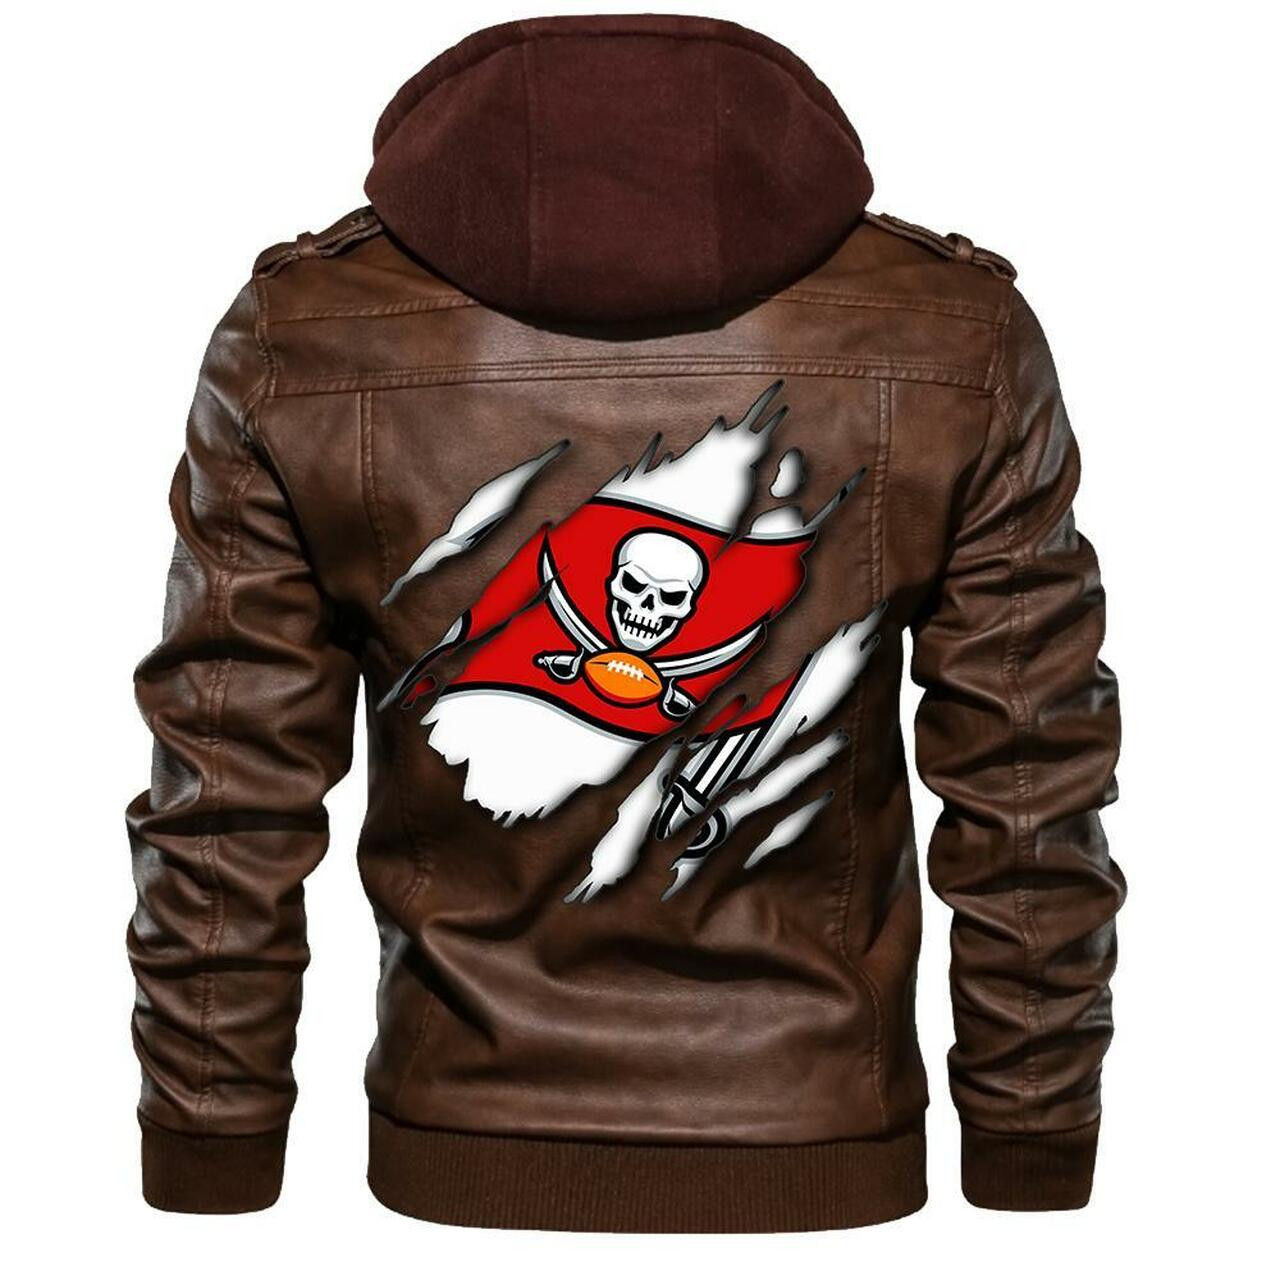 You can find Leather Jacket online at a great price 62